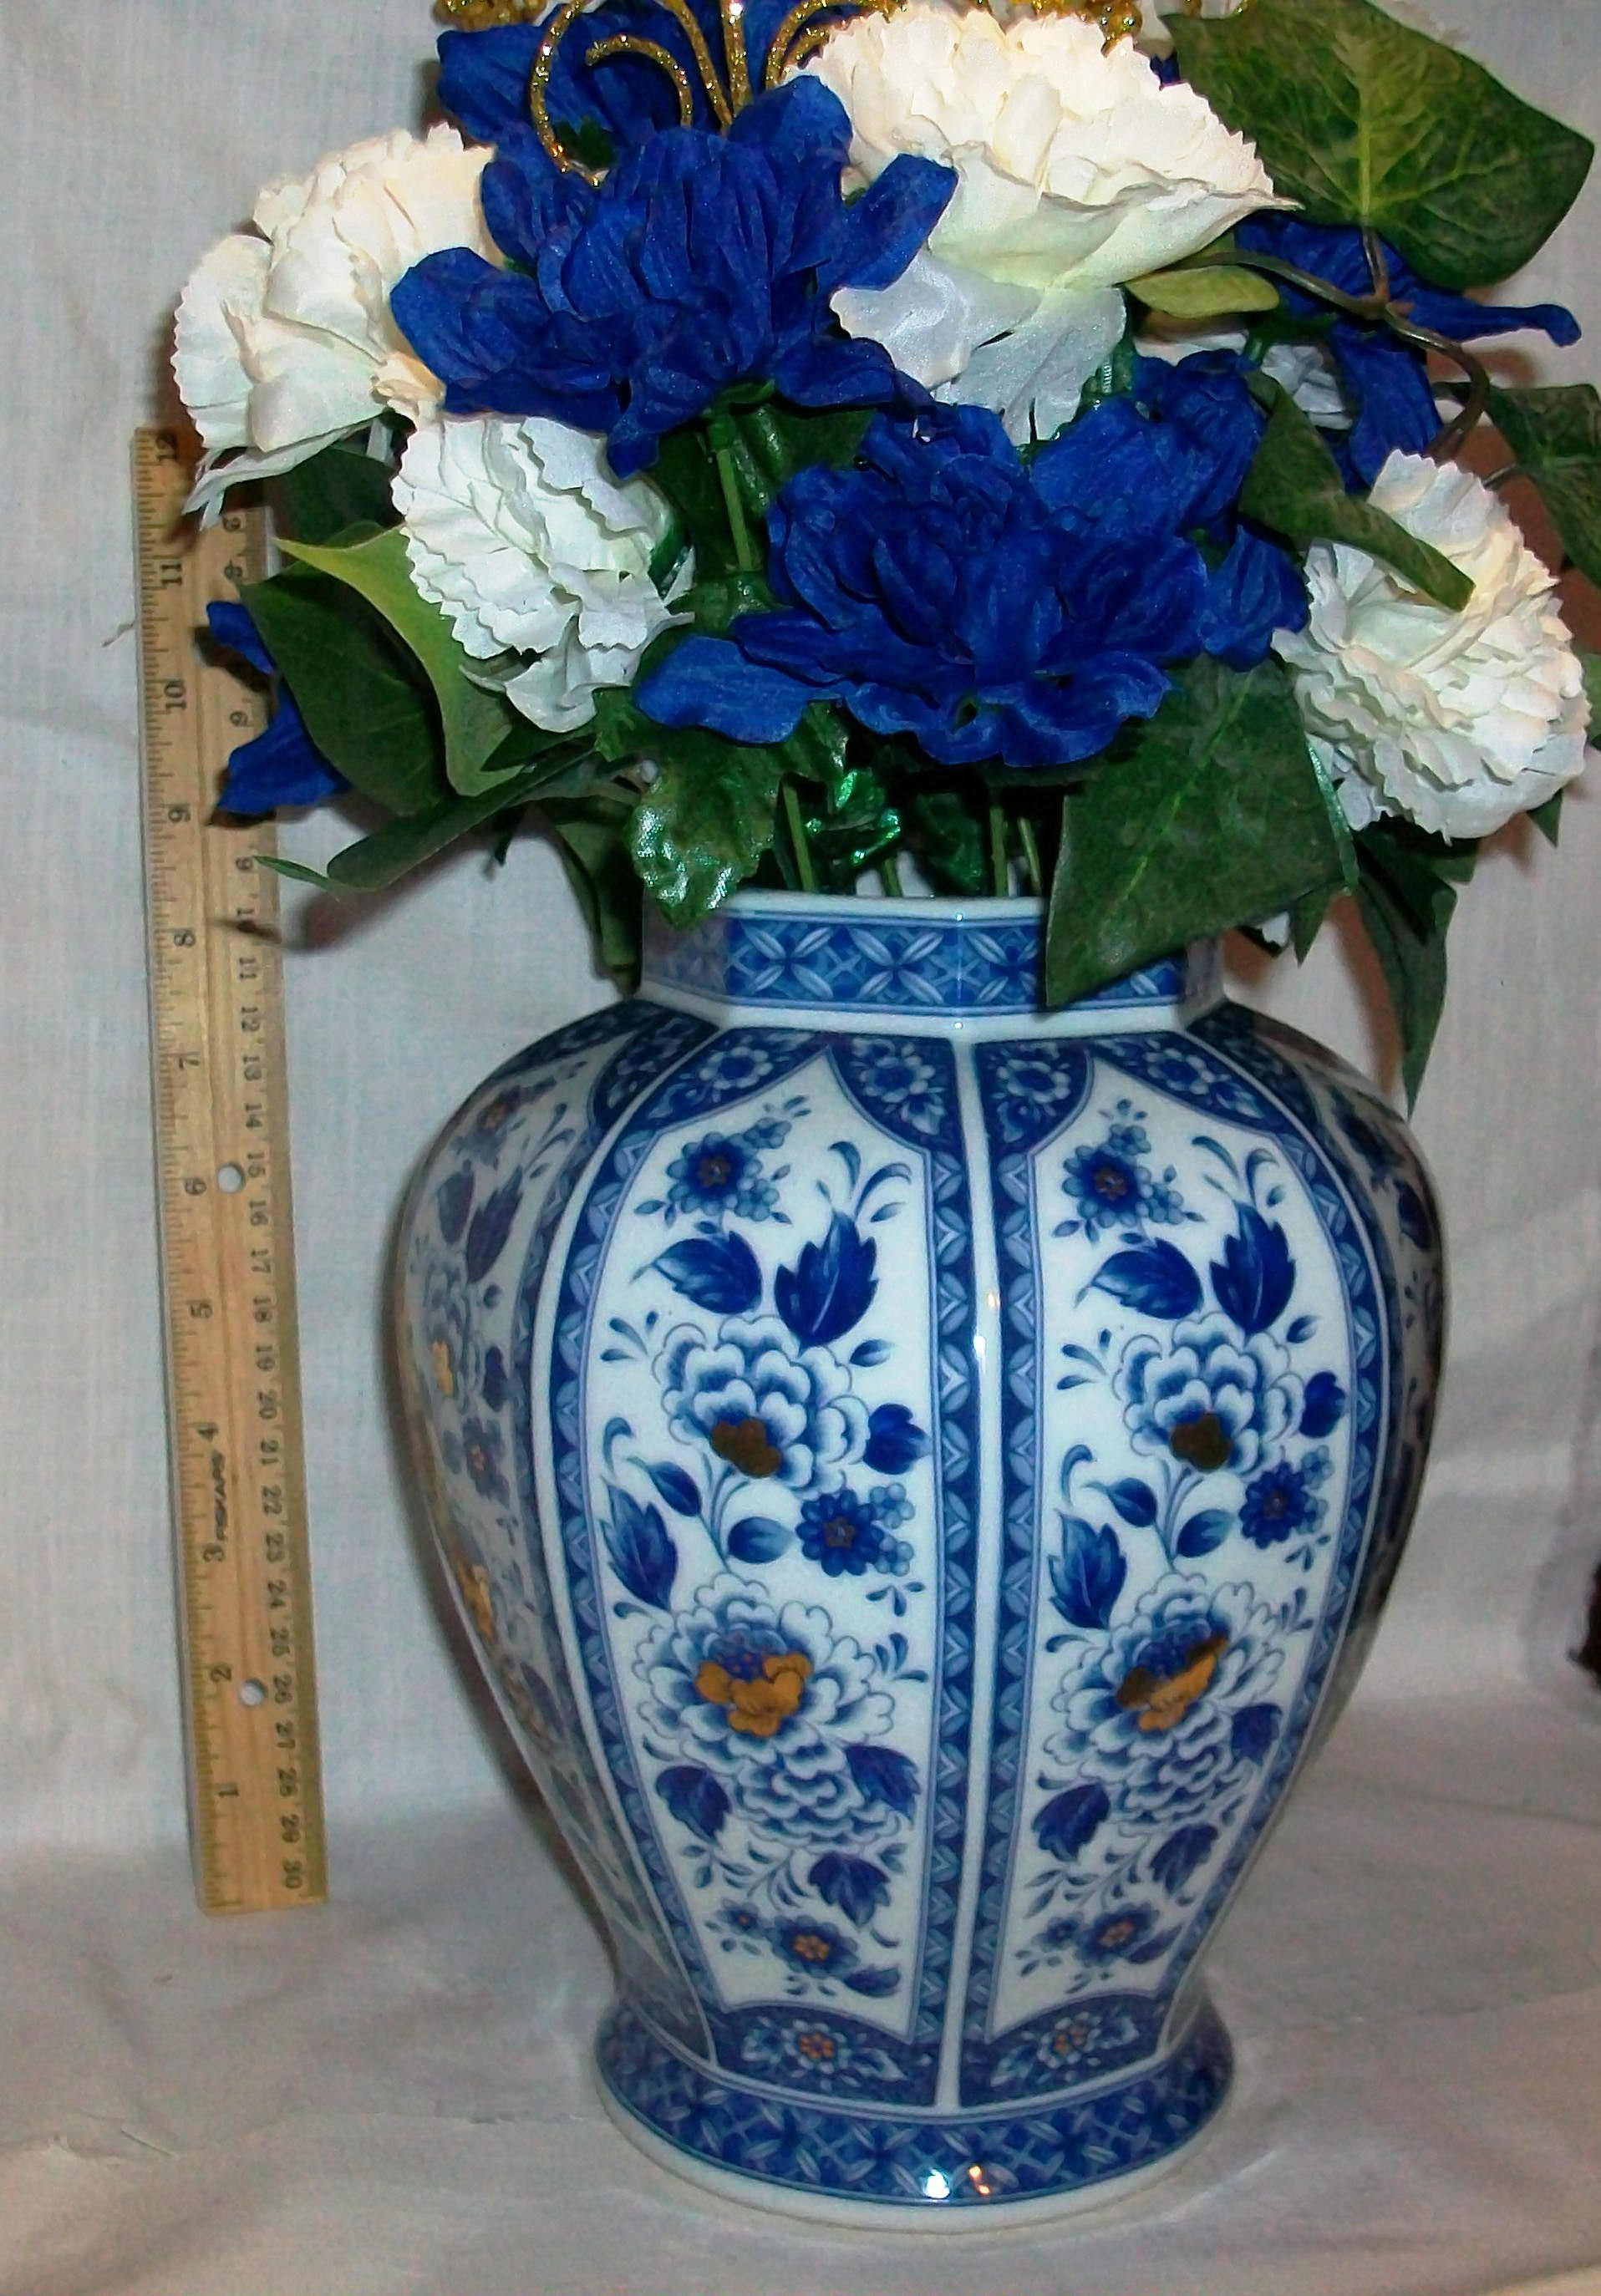 27 Unique Tall Cobalt Blue Glass Vase 2024 free download tall cobalt blue glass vase of listing 128 is an asian hand painted blue and gold vase in dc29fc294c28ezoom